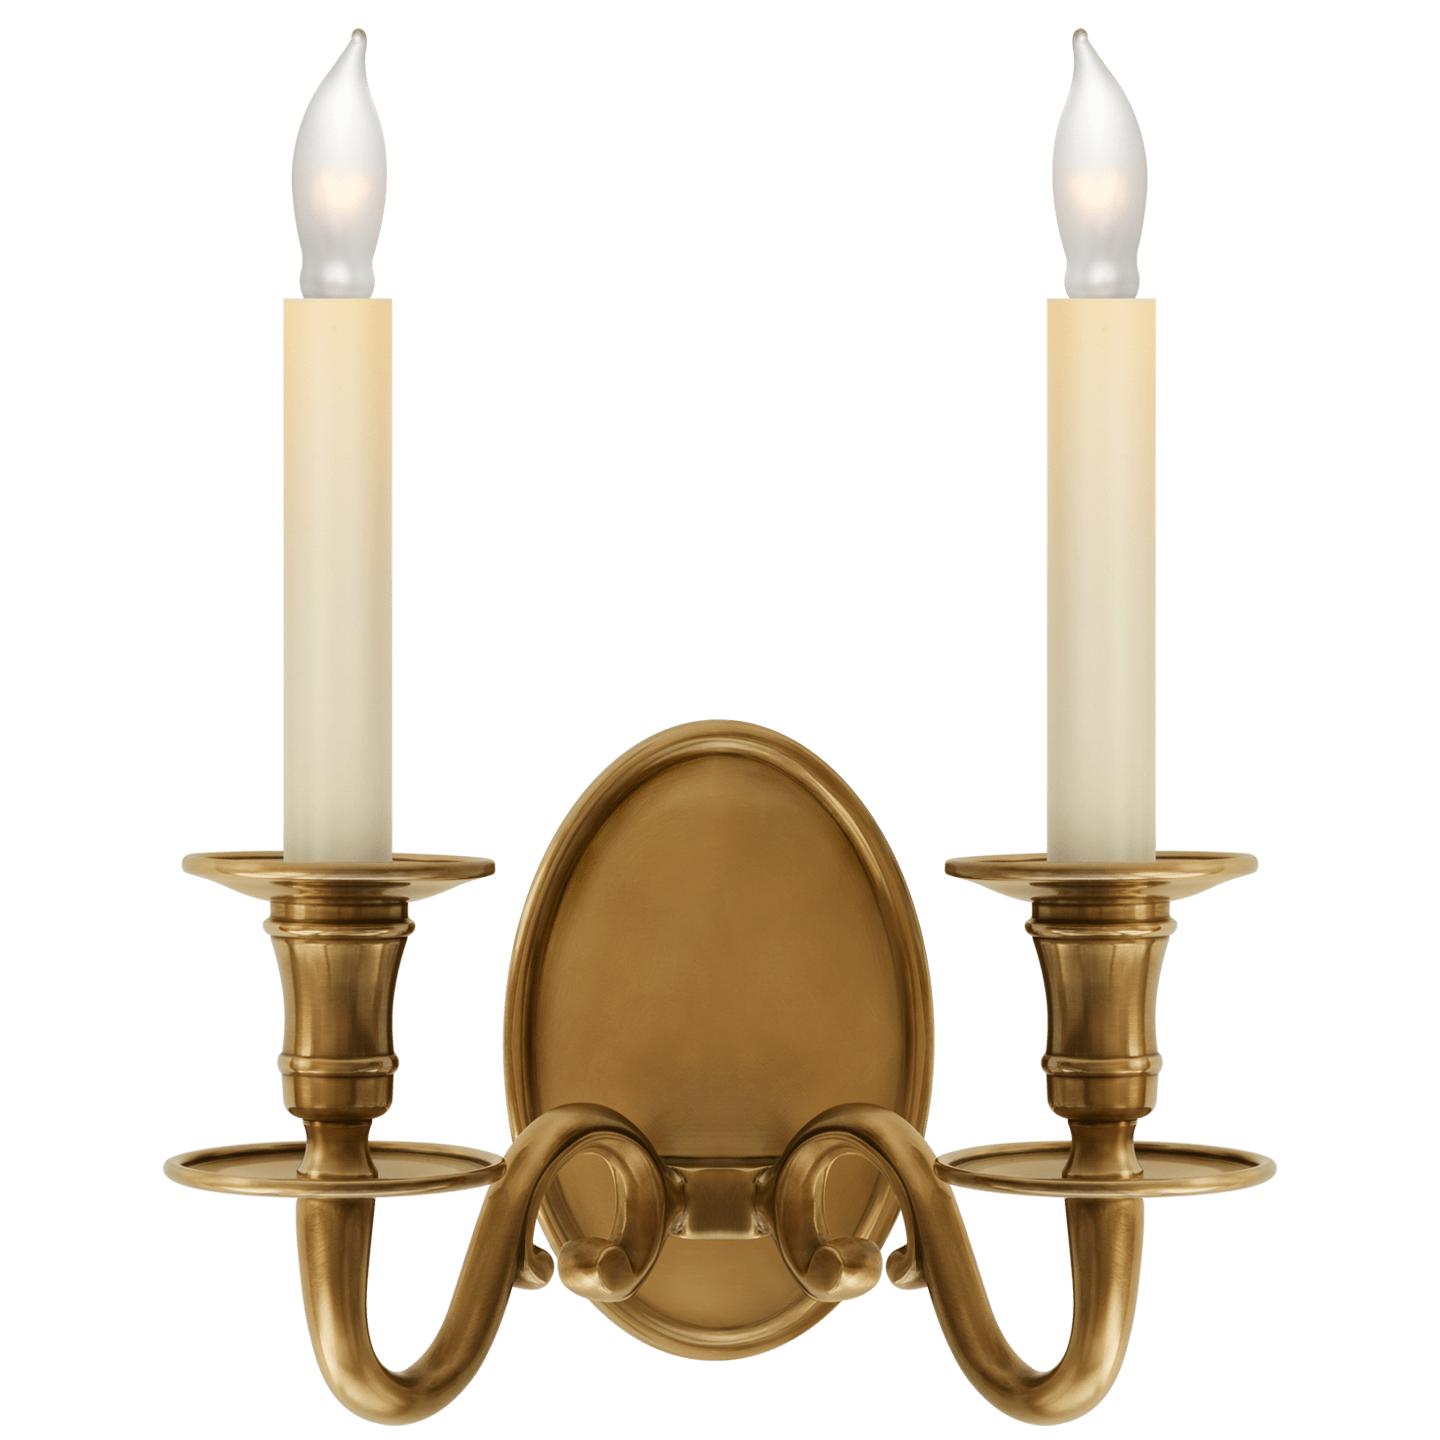 Antique-Burnished Brass CHS109S Shade Sold Separately